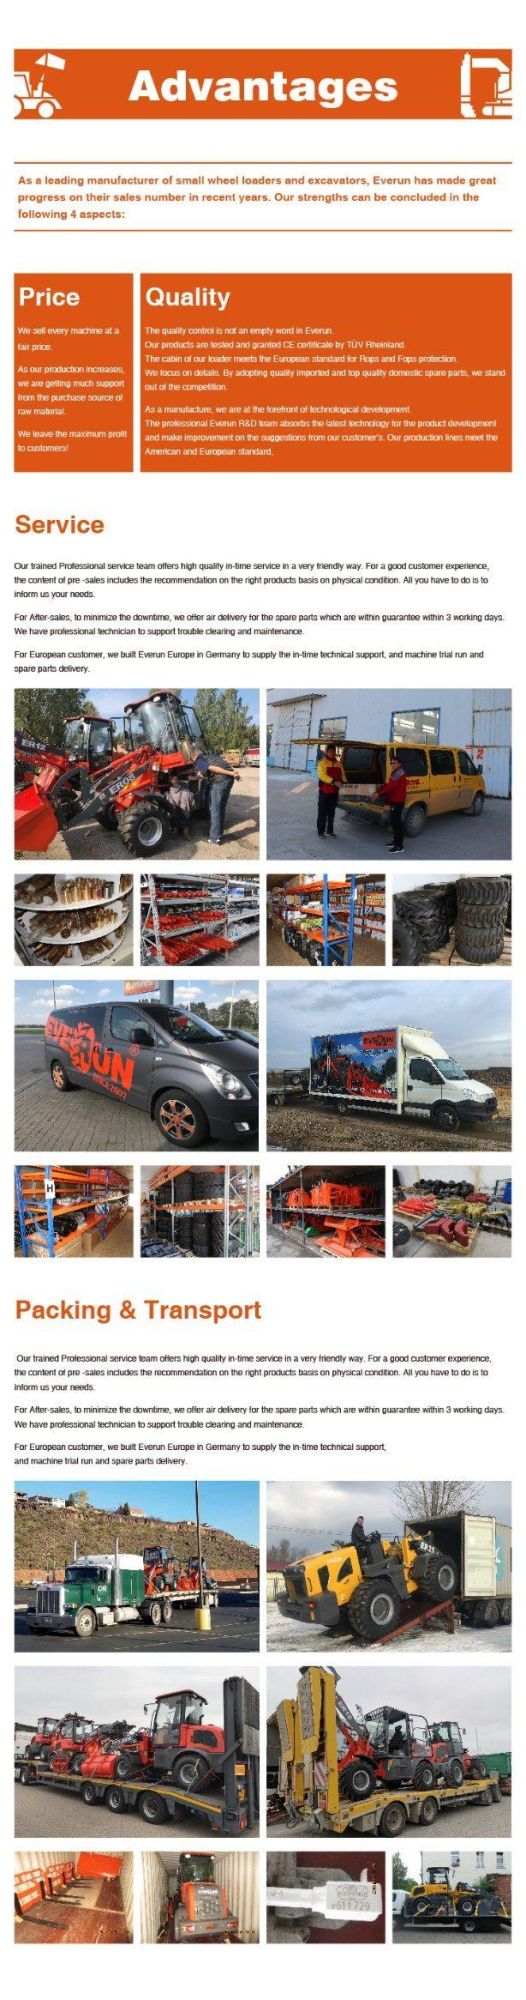 Chinese Everun Smart Battery Rough Terrain Diesel 3ton 1070mm New Telescopic Forklift Extension Custom Forks Attachment